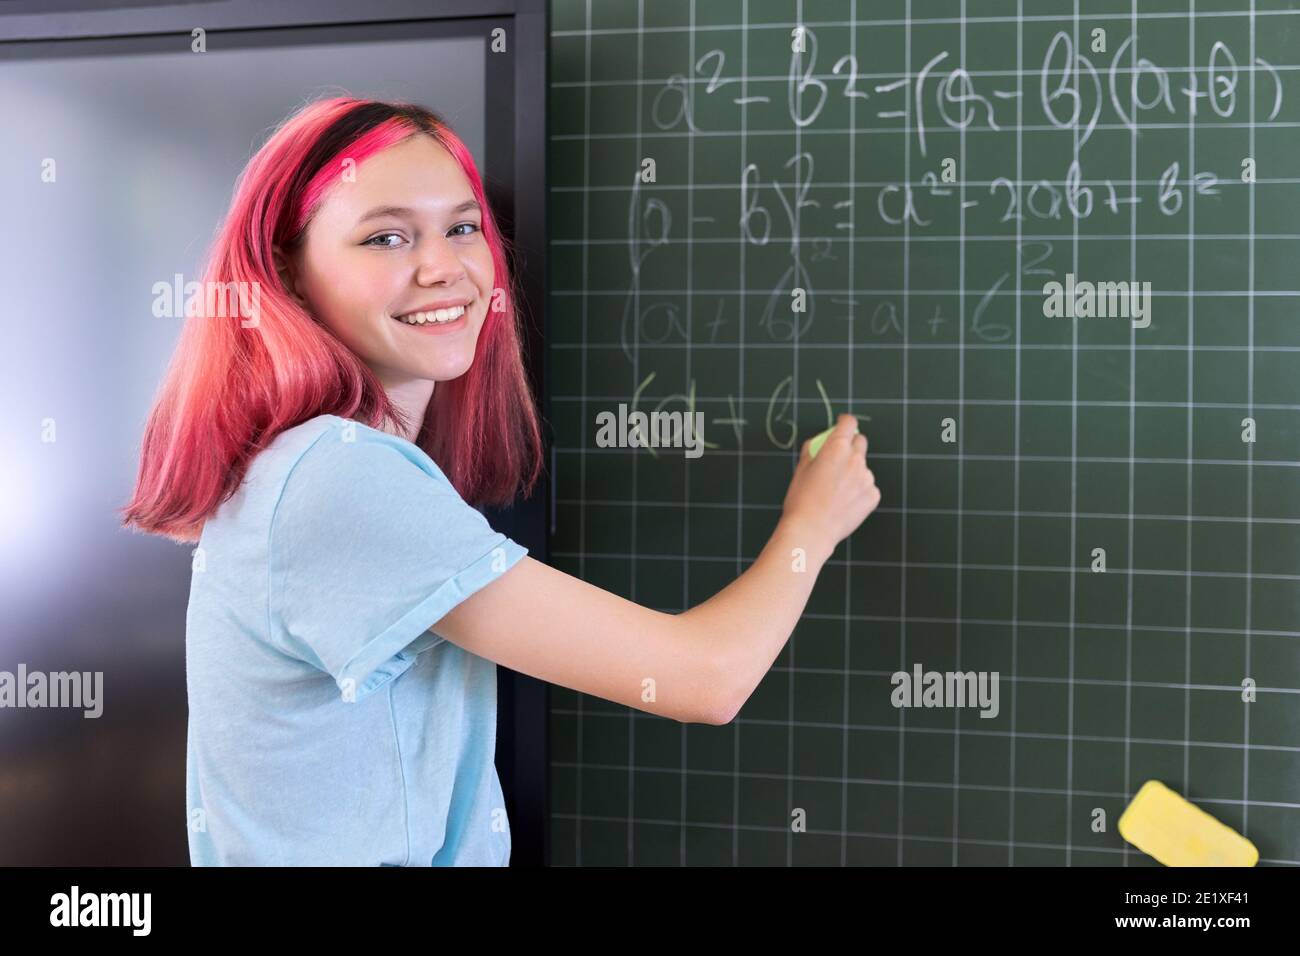 Female student teenager at a math lesson writing in chalk on a blackboard Stock Photo